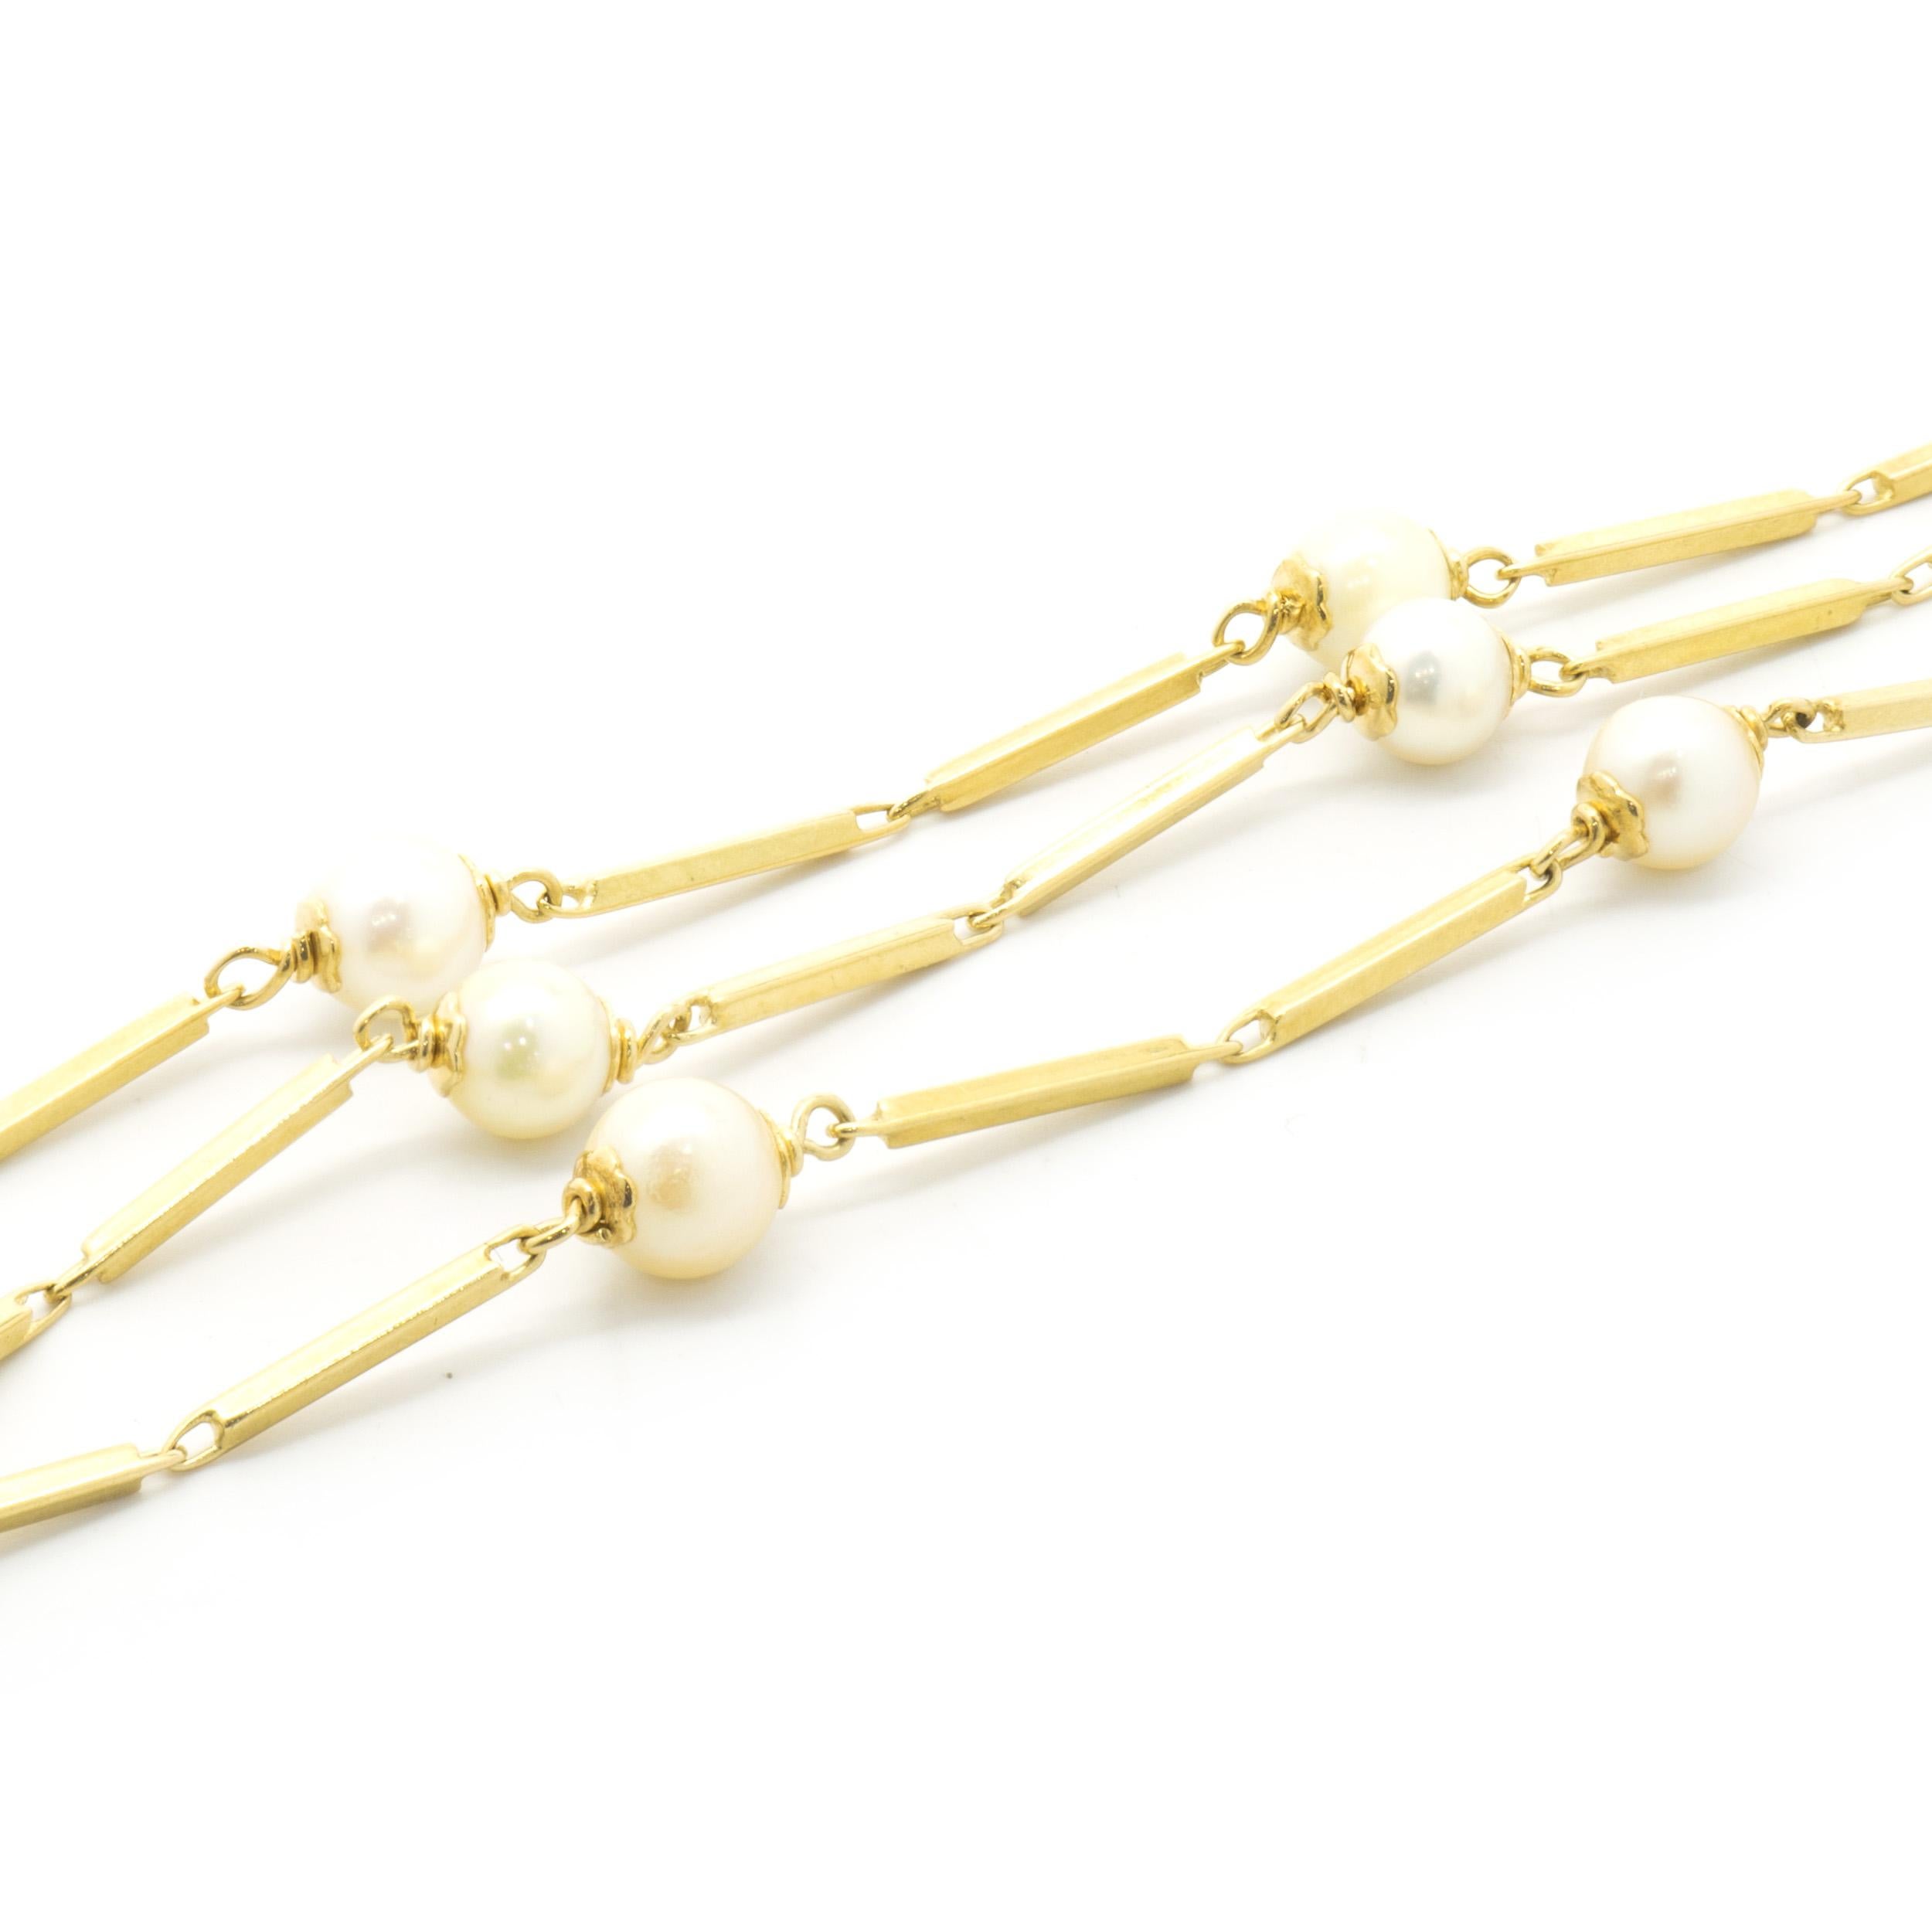 Designer: custom
Material: 18K yellow gold
Dimensions: bracelet will fit up to a 7.75-inch wrist
Weight: 12.57 grams